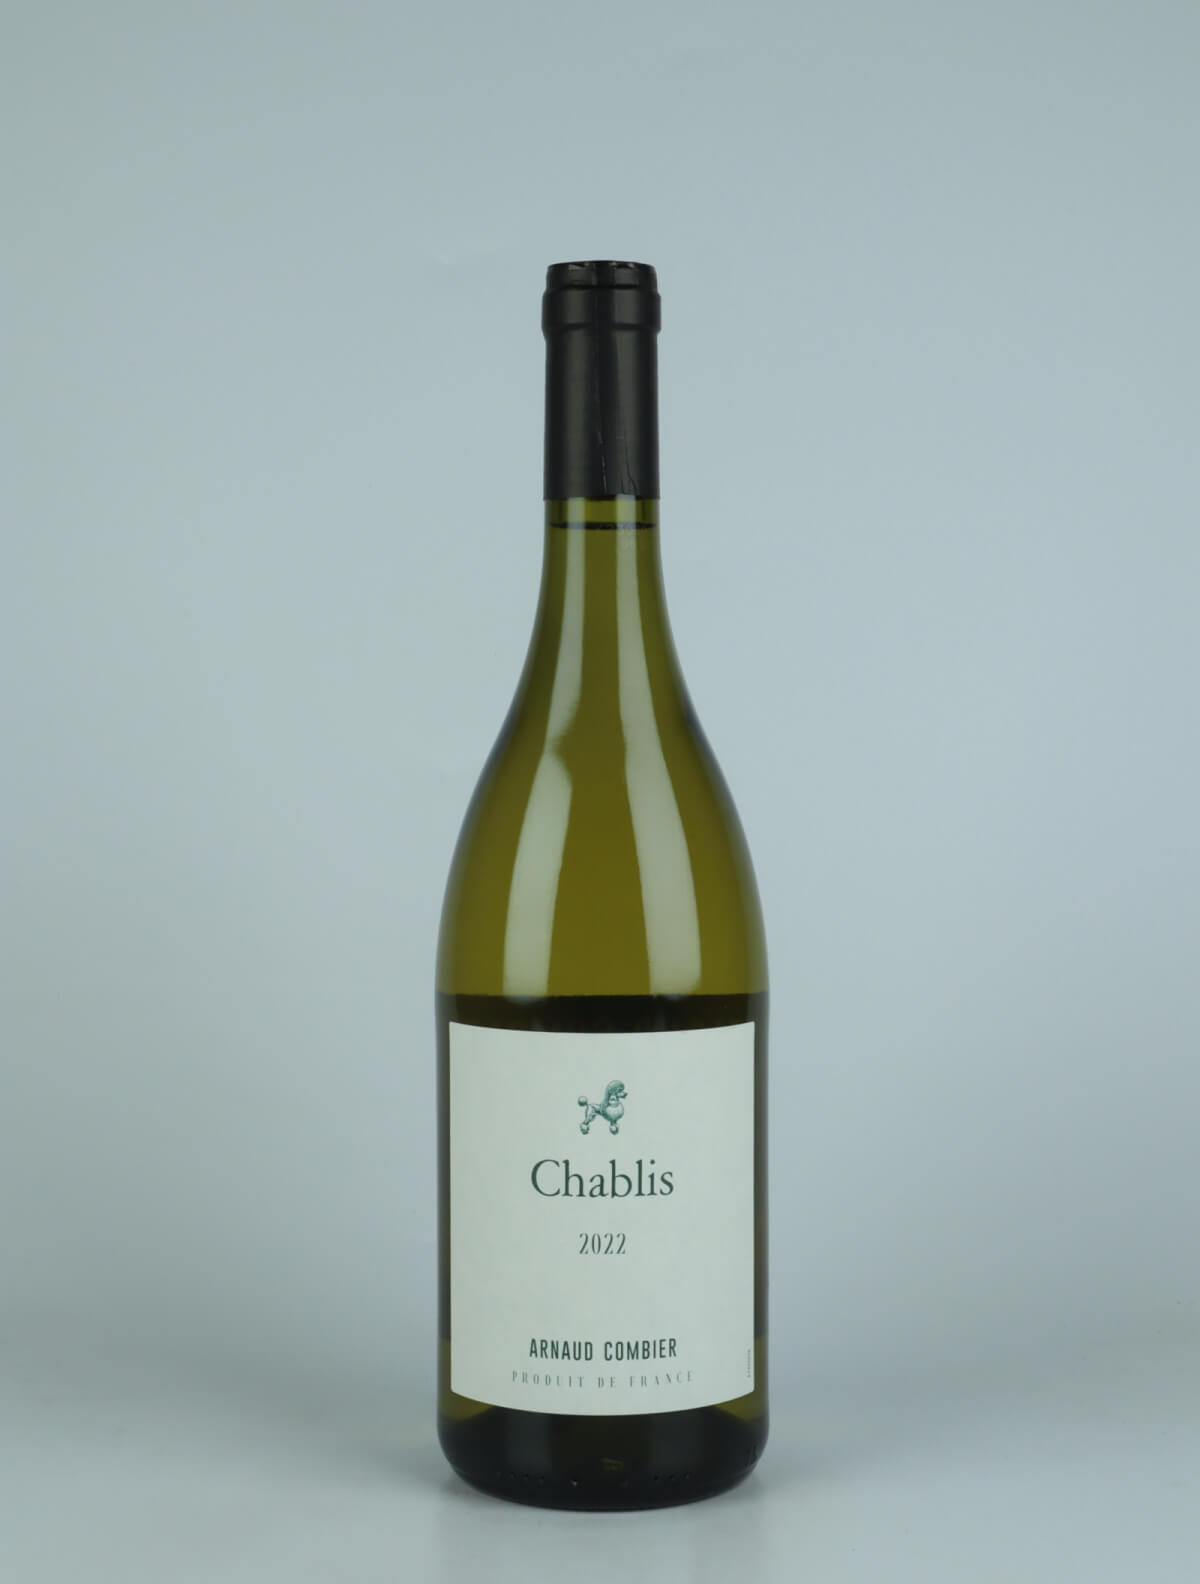 A bottle 2022 Chablis White wine from Arnaud Combier, Burgundy in France